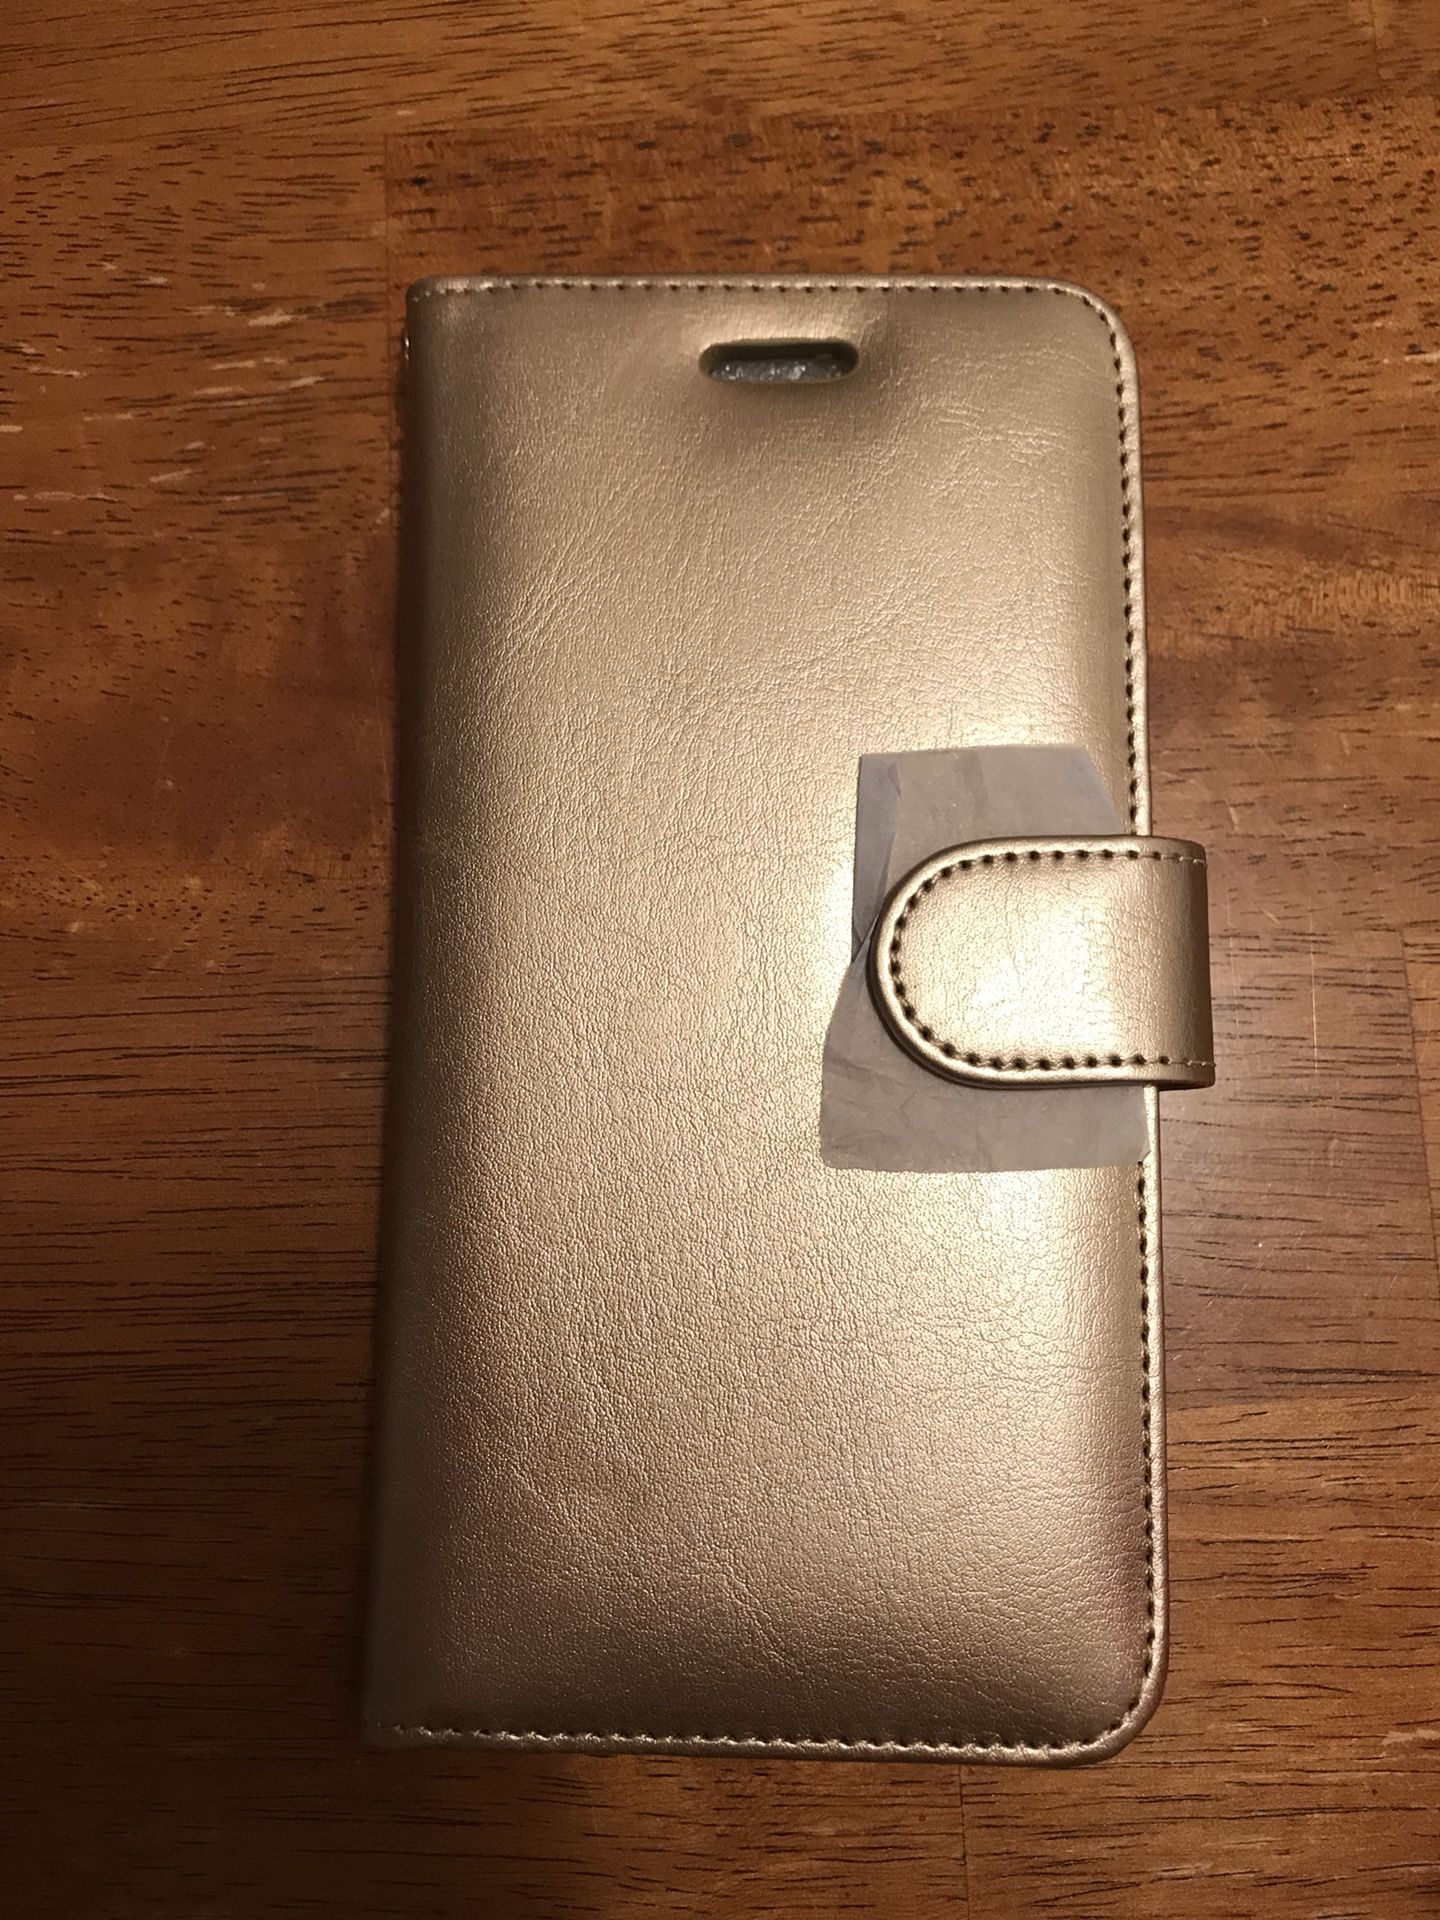 Gold iPhone 7 Plus case and wallet combo